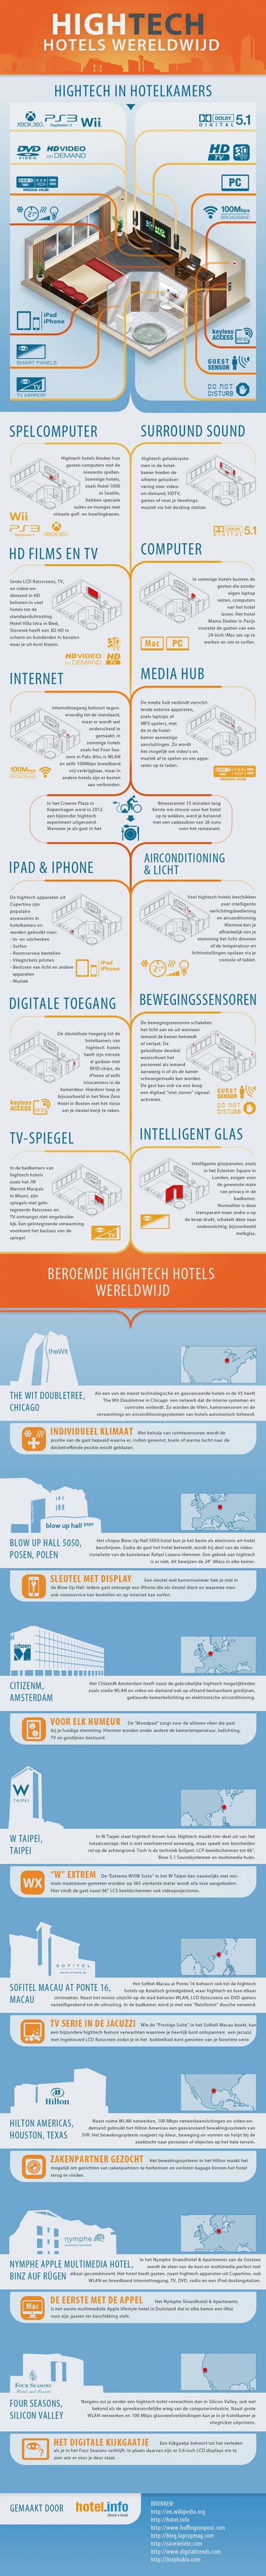 hightech-hotels-infographic